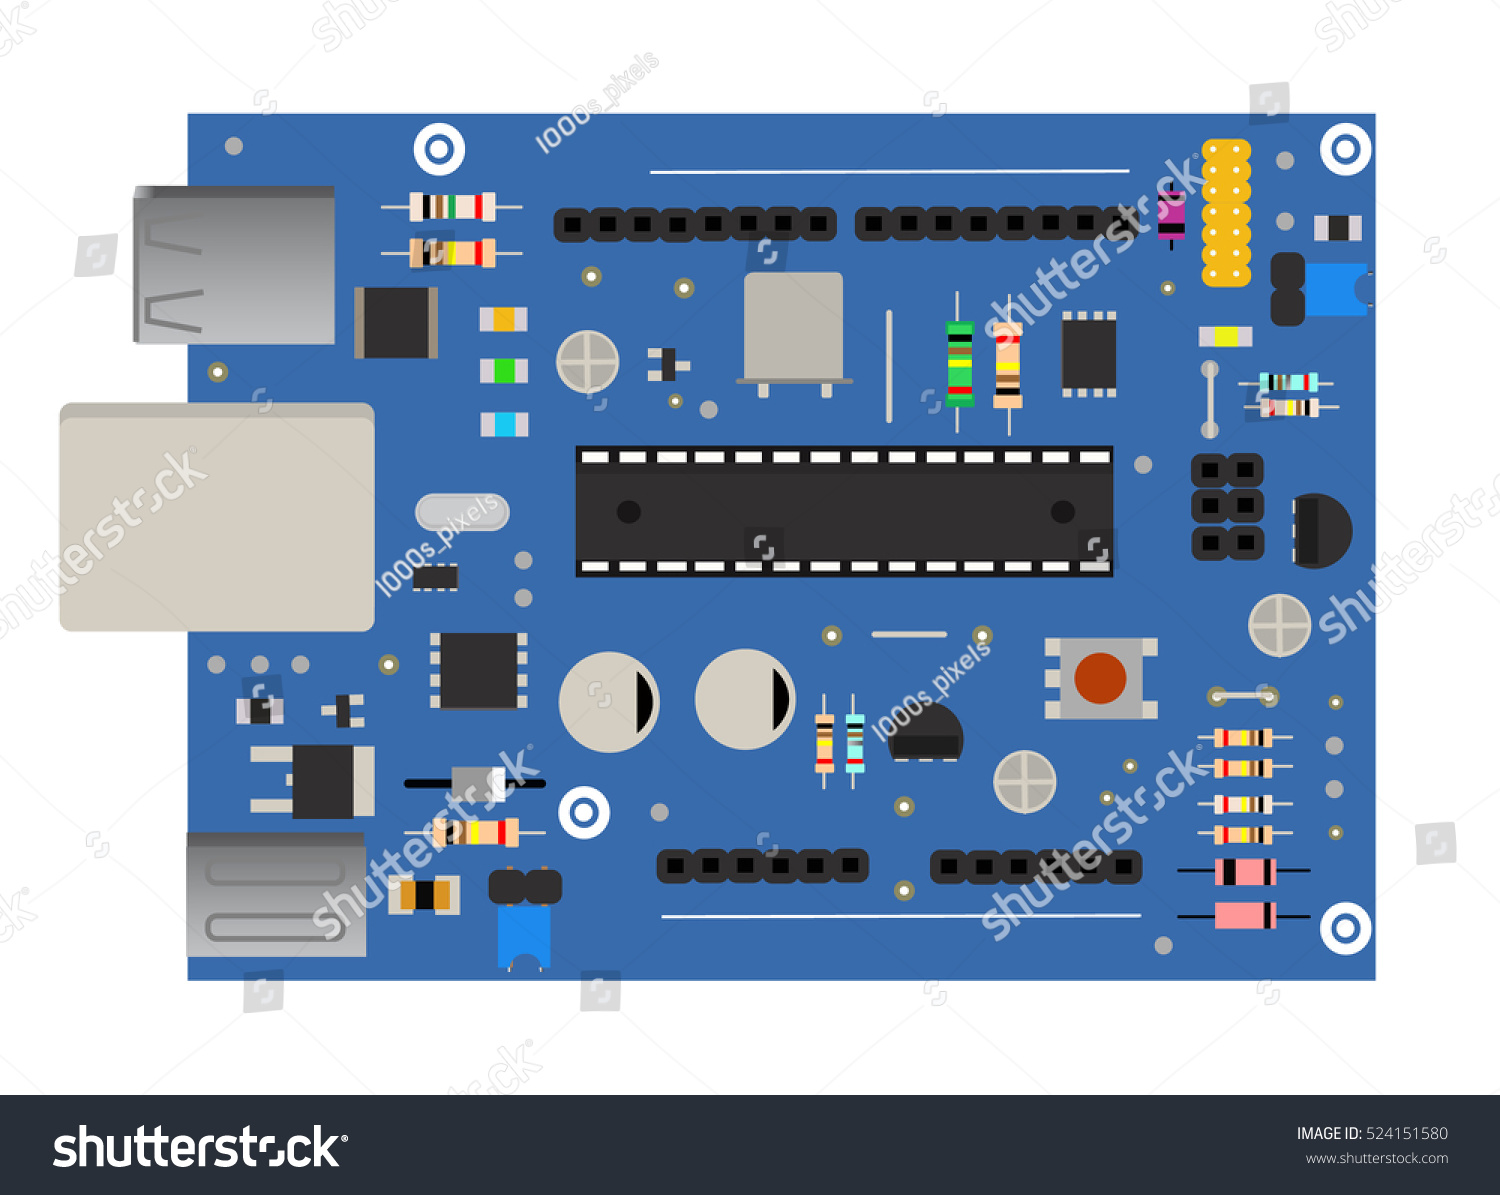 SVG of DIY electronic board with a micro-controller, LEDs, connectors, and other electronic components, to form the basic of smart home, robotic, and many other projects related to electronics svg